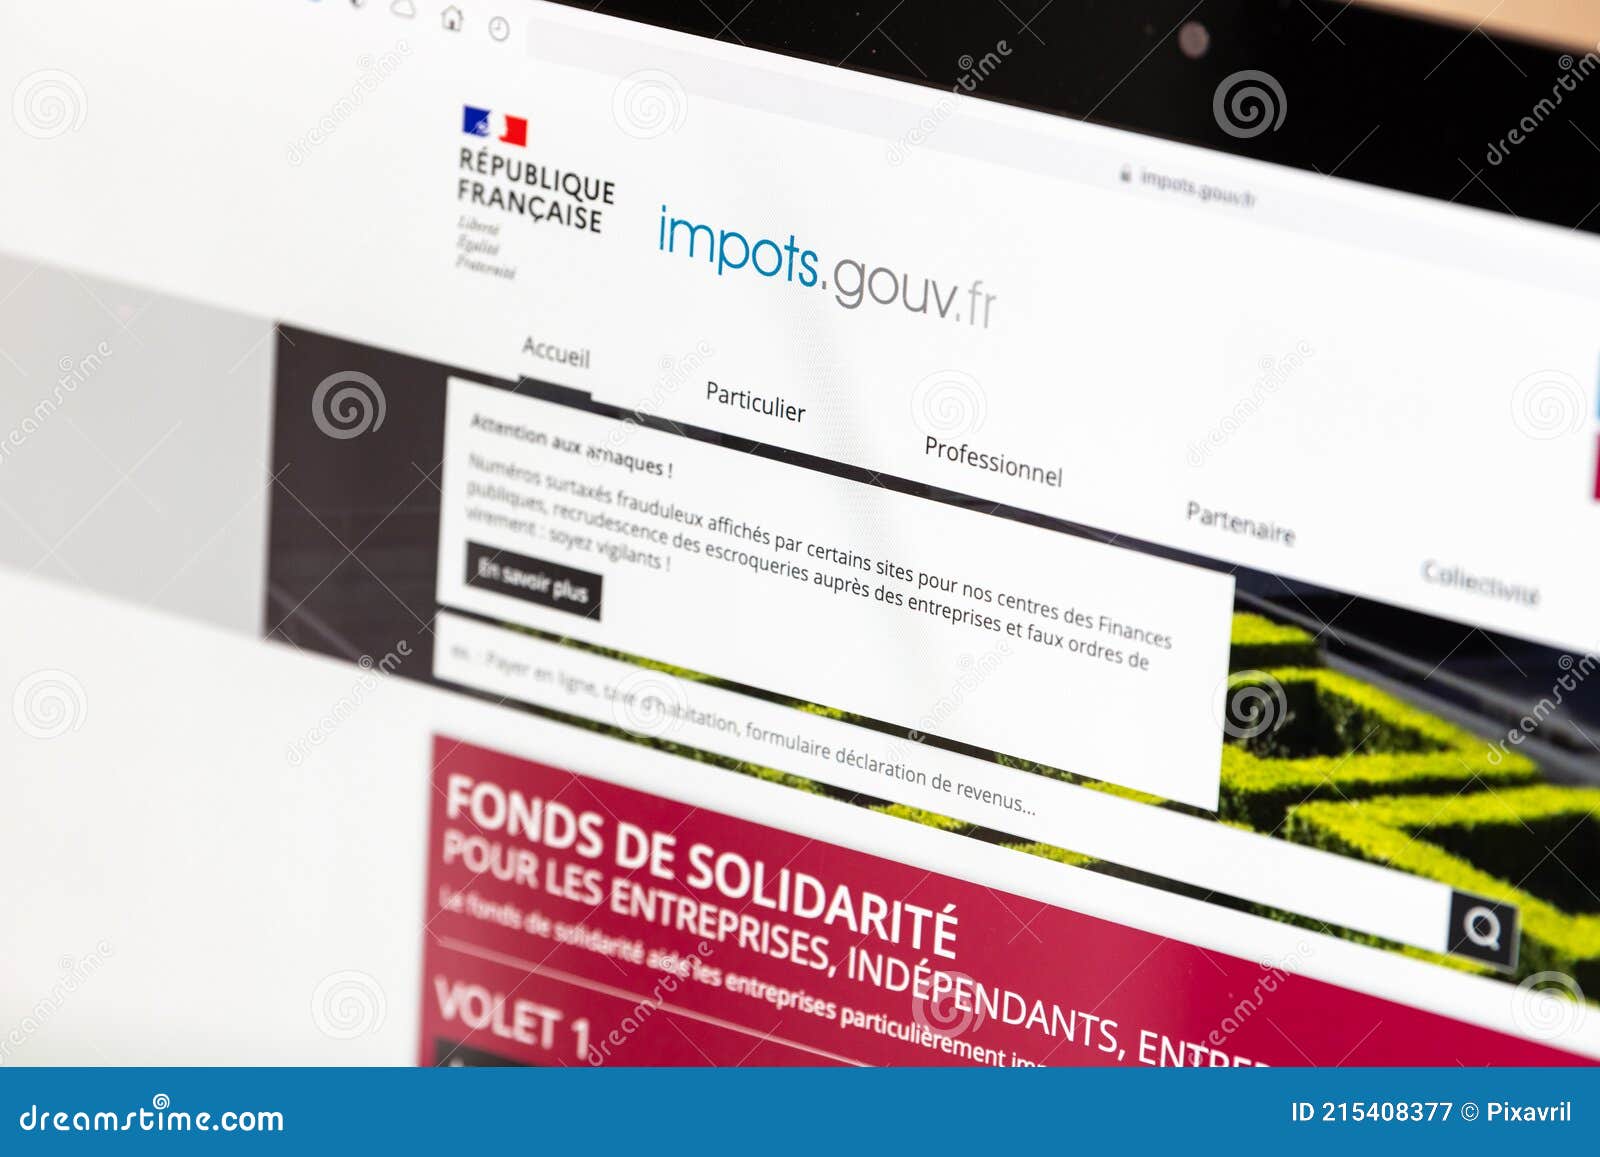 french-tax-website-on-a-computer-french-people-are-invited-to-file